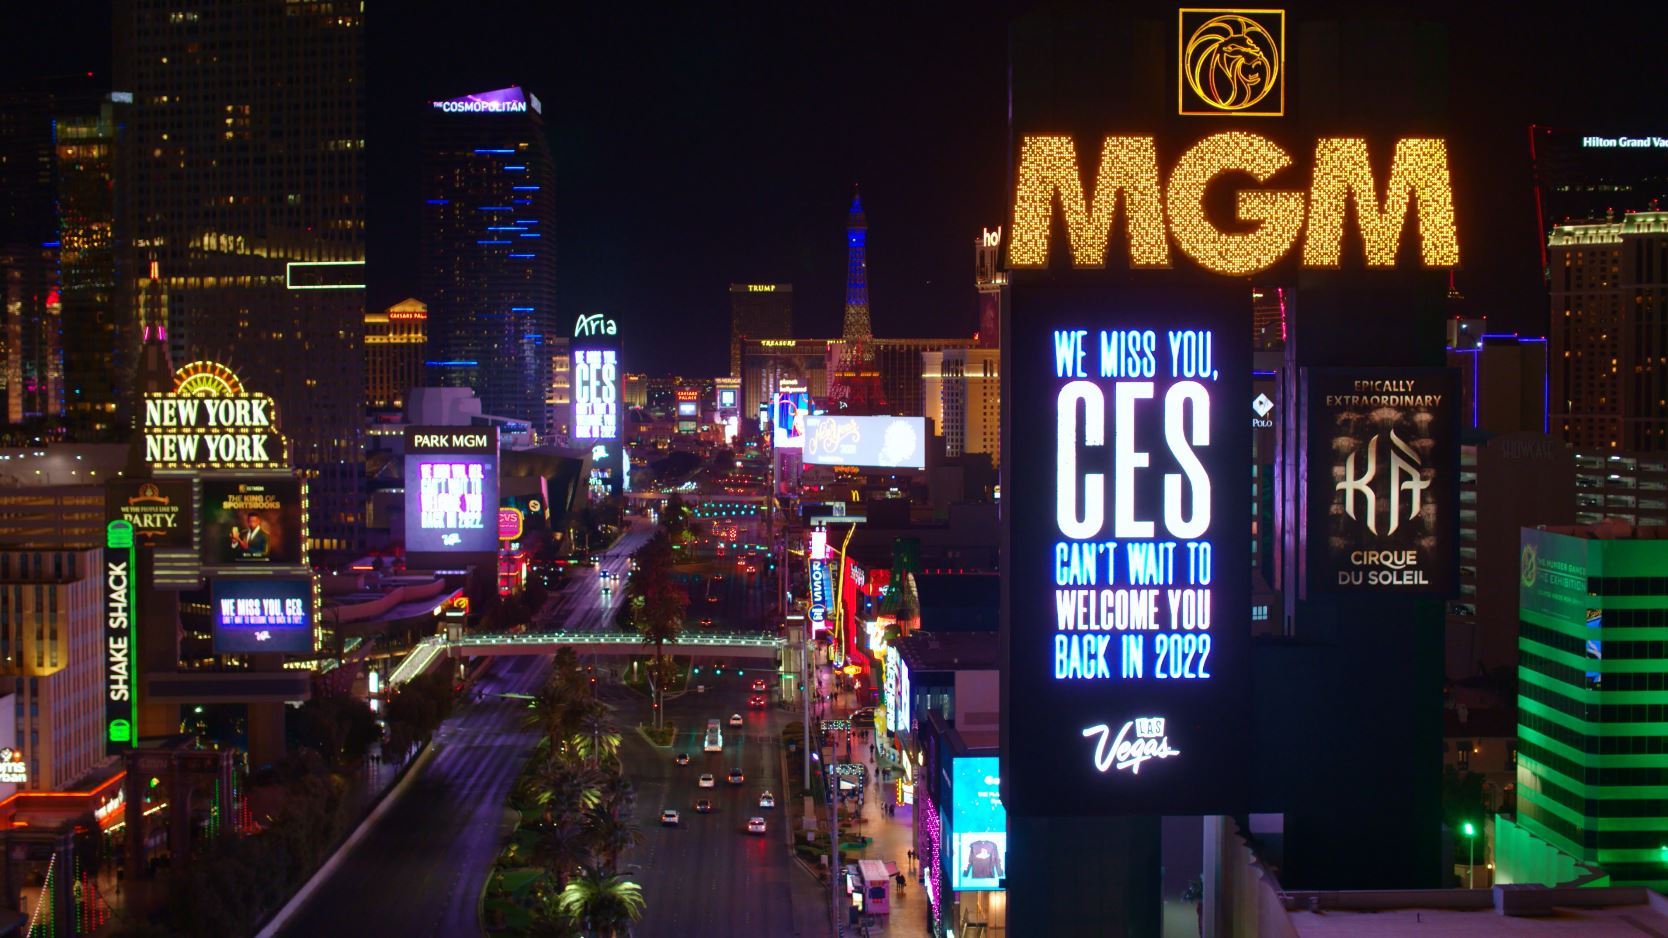 CES Marquee Takeover